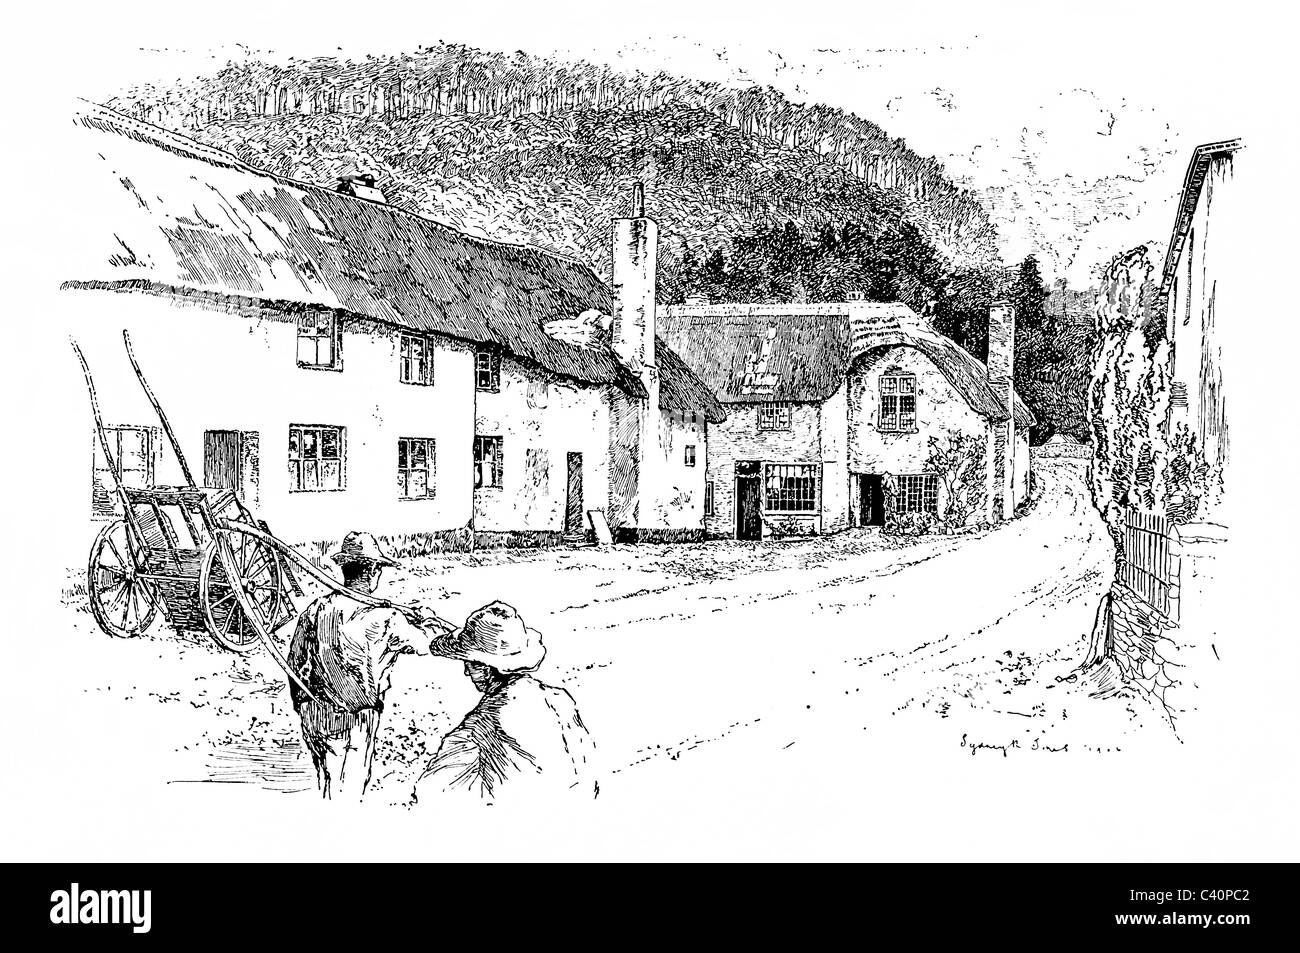 Dulverton, Somerset - pen and ink illustration from 'Old English Country Cottages' by Charles Holme, 1906. Stock Photo